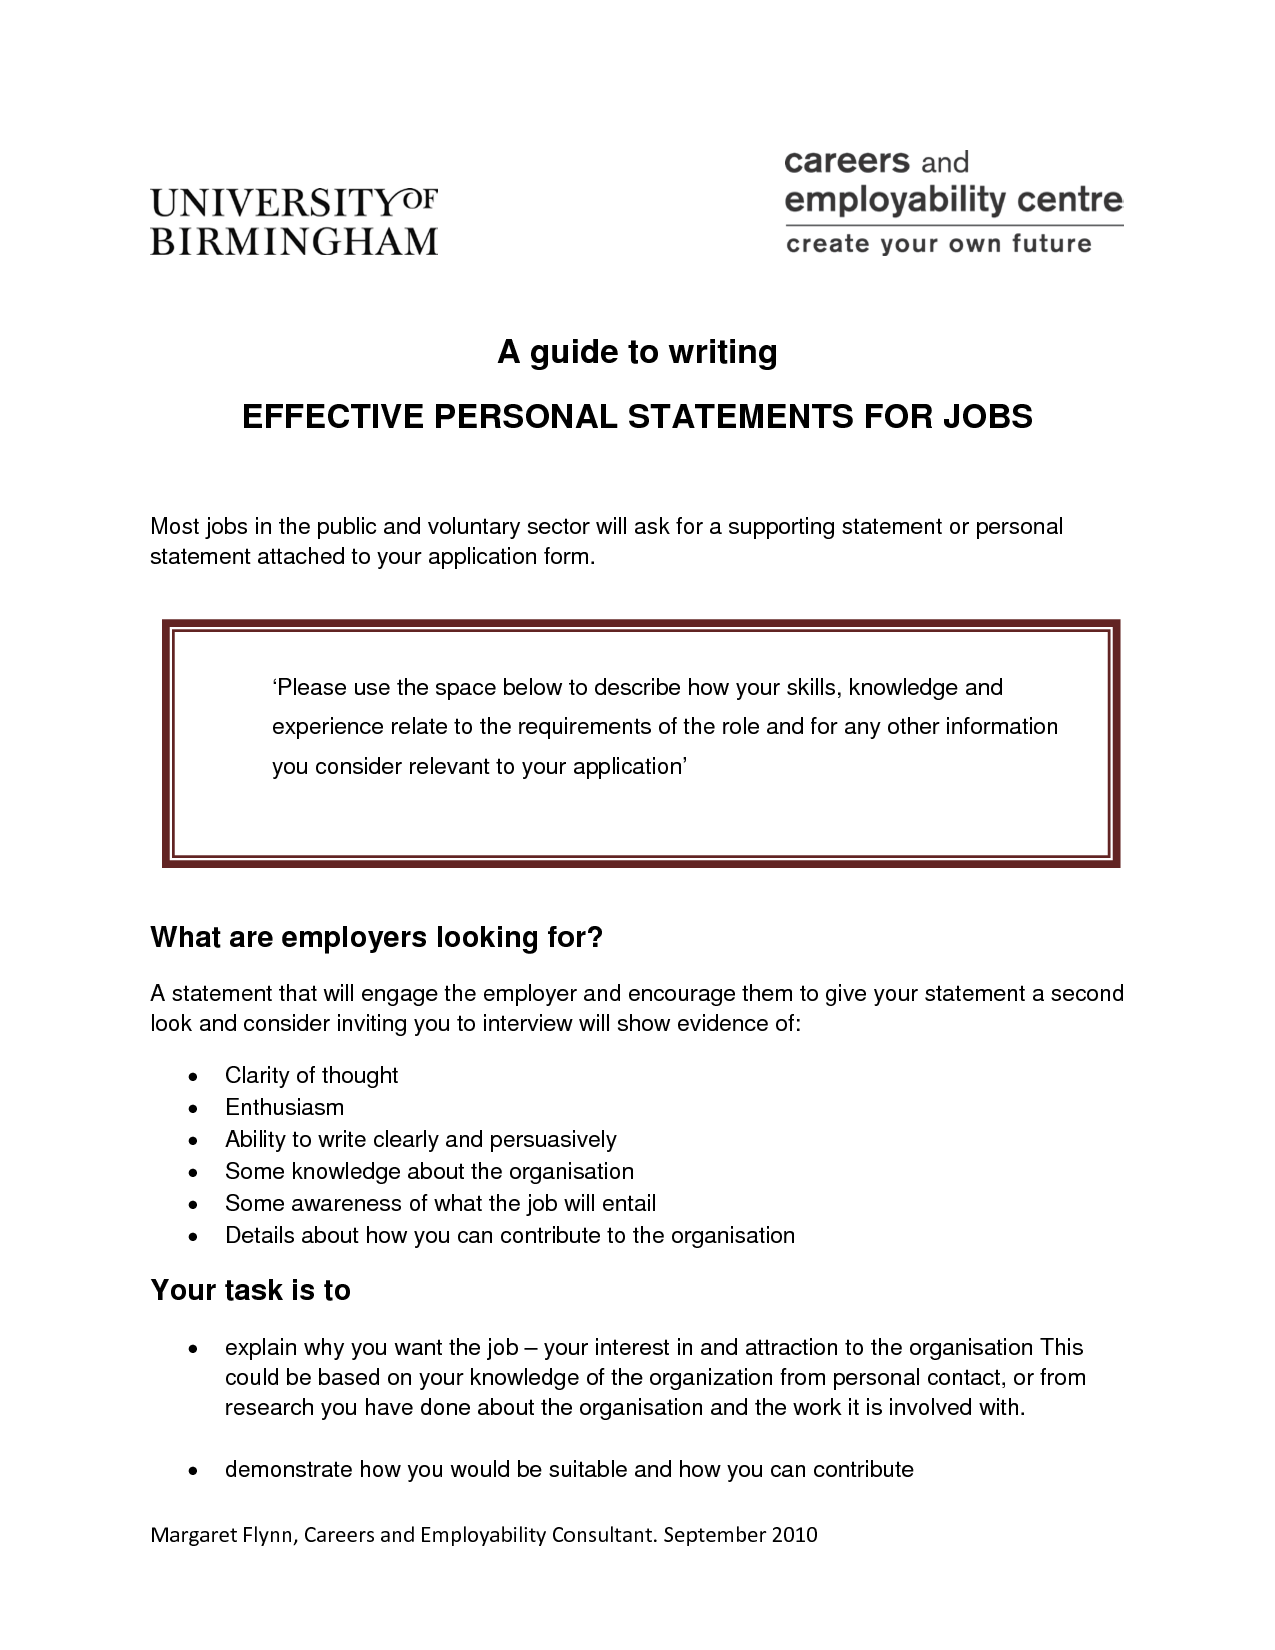 How to write a good personal statement job application